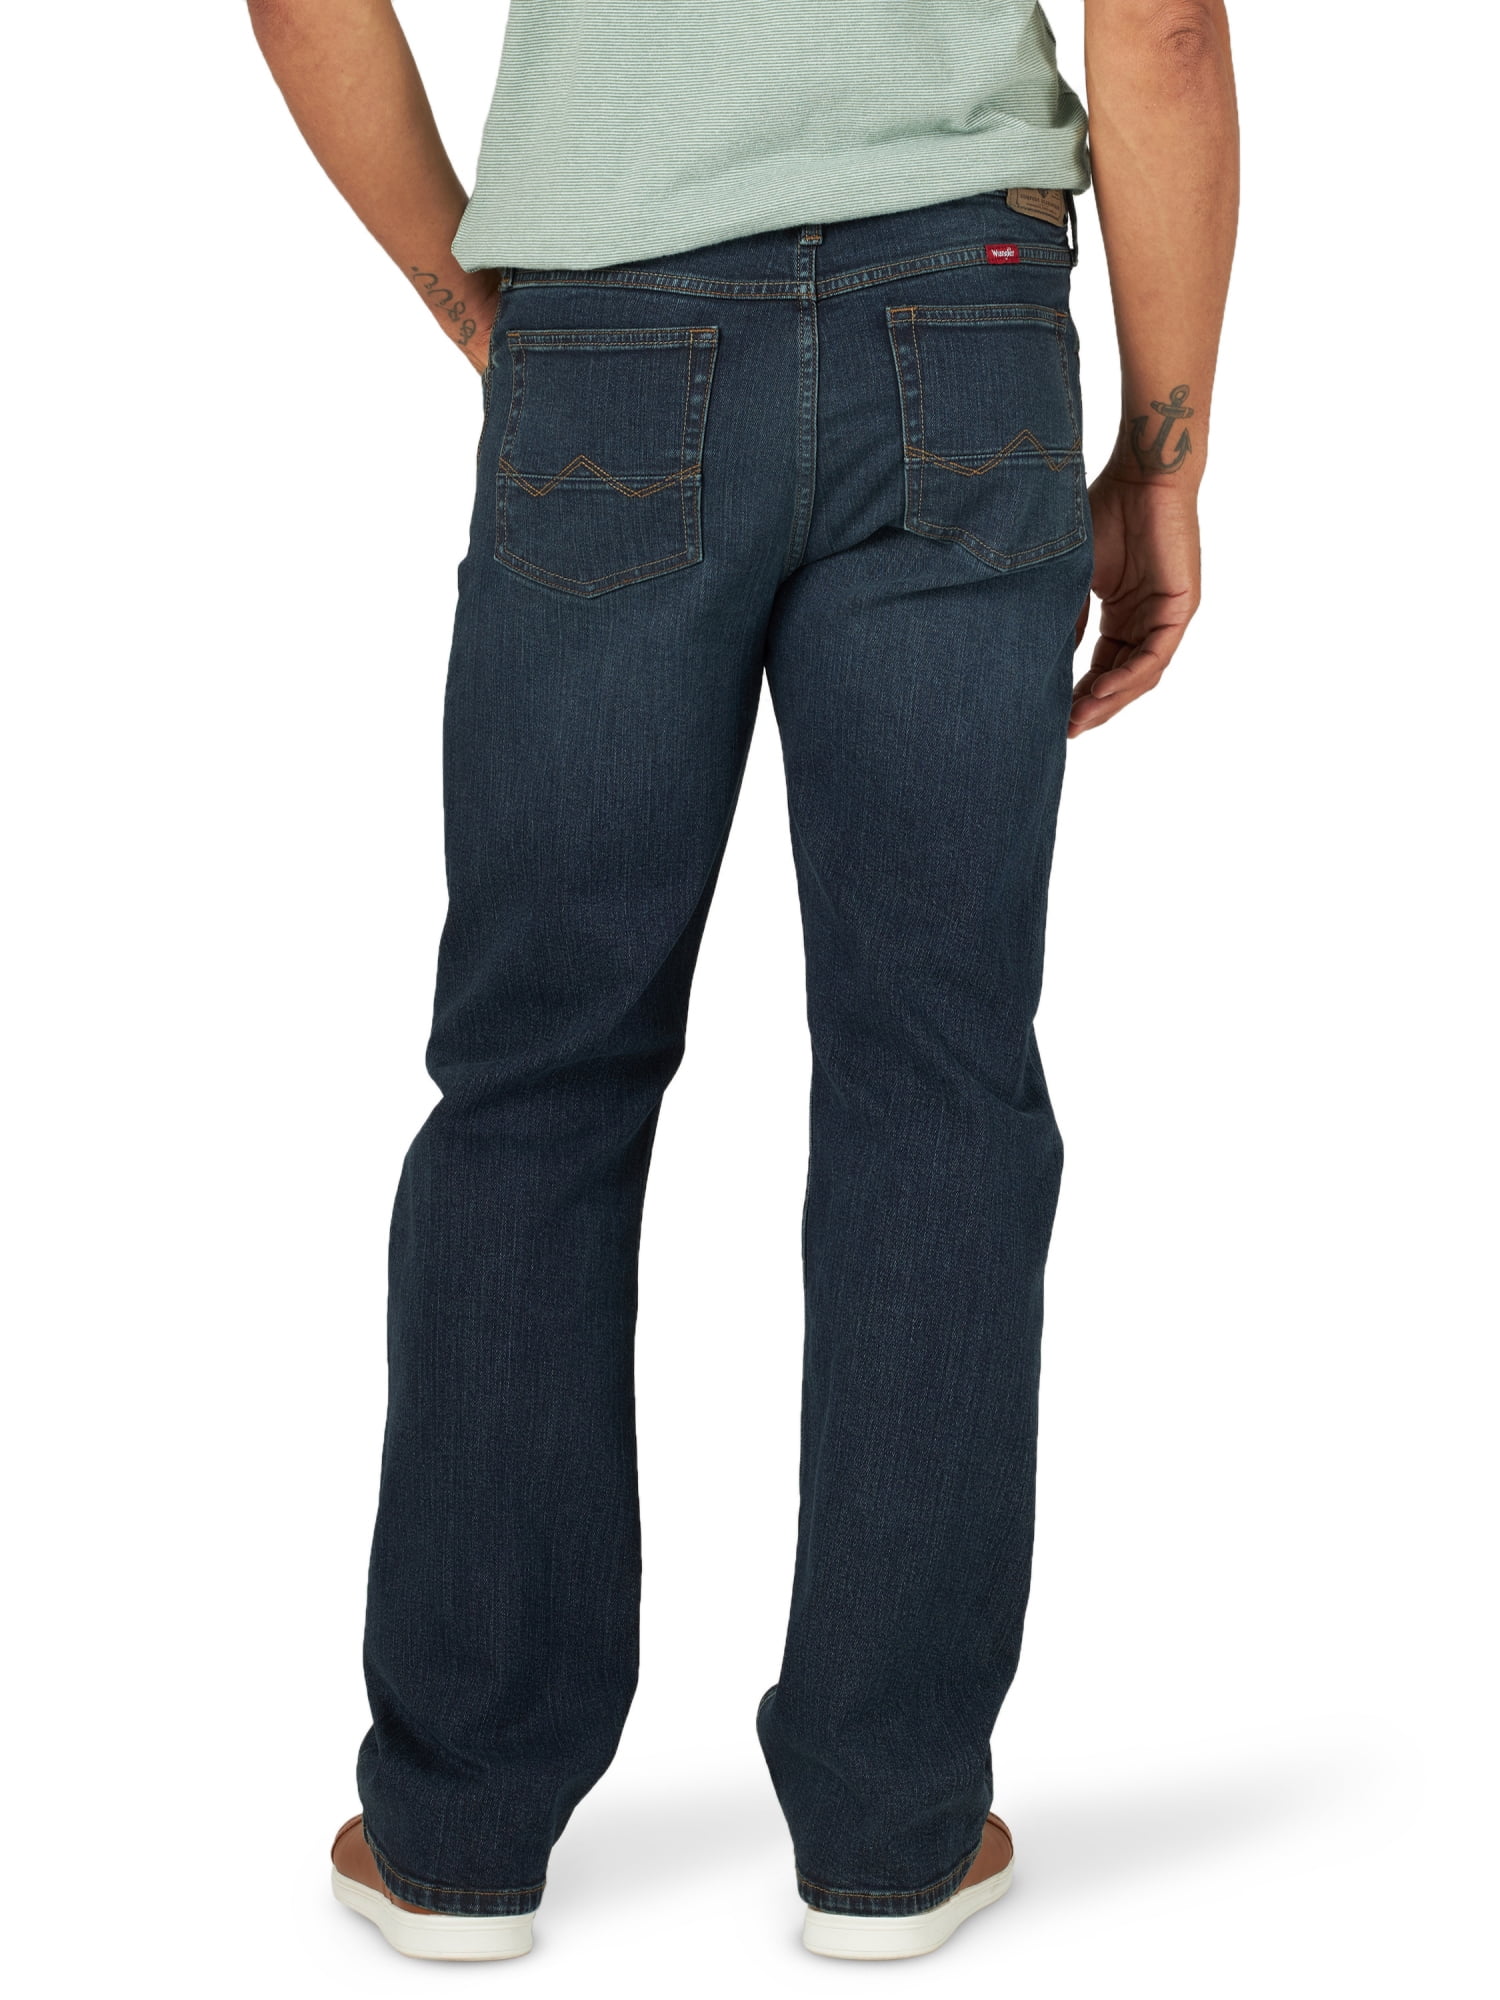 magnetron tyfoon Westers Wrangler Men's and Big Men's Relaxed Bootcut Jean - Walmart.com